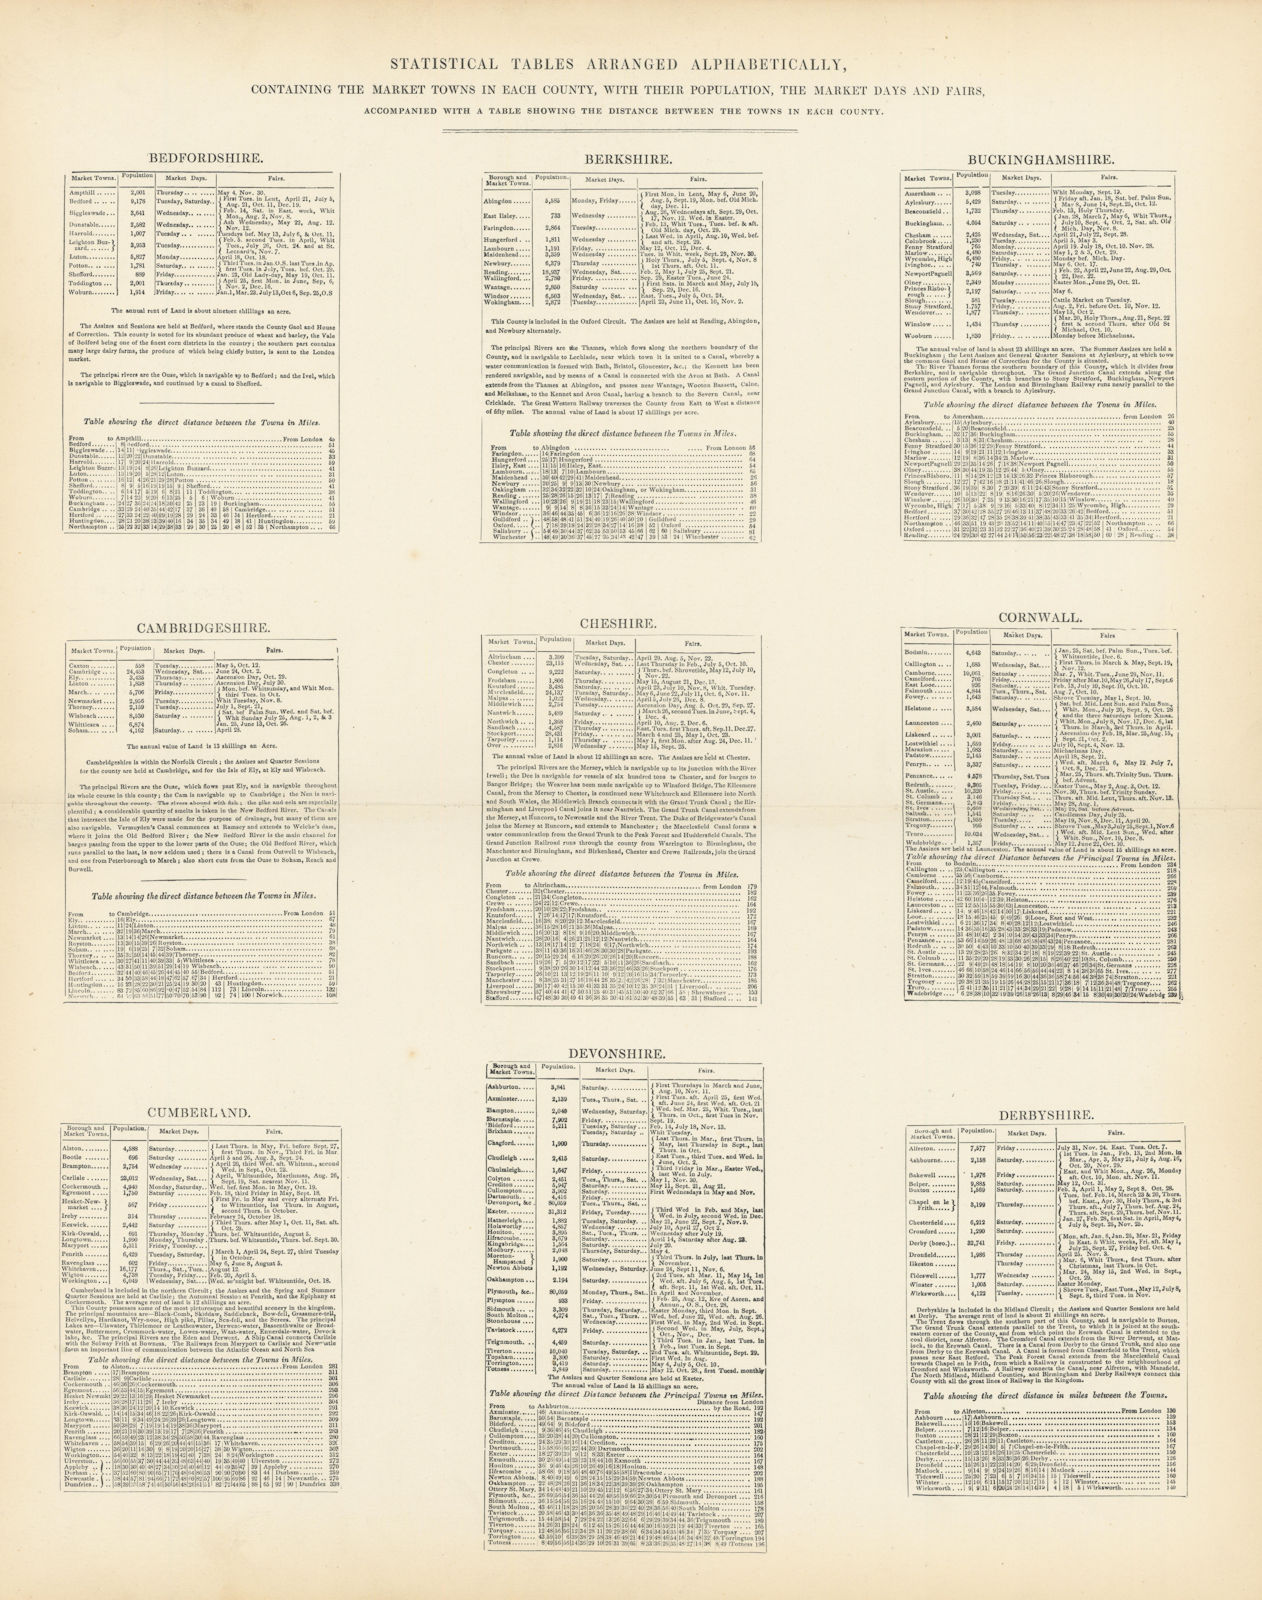 Market Towns, days, fairs & population by county. Bedfordshire-Derbyshire 1870